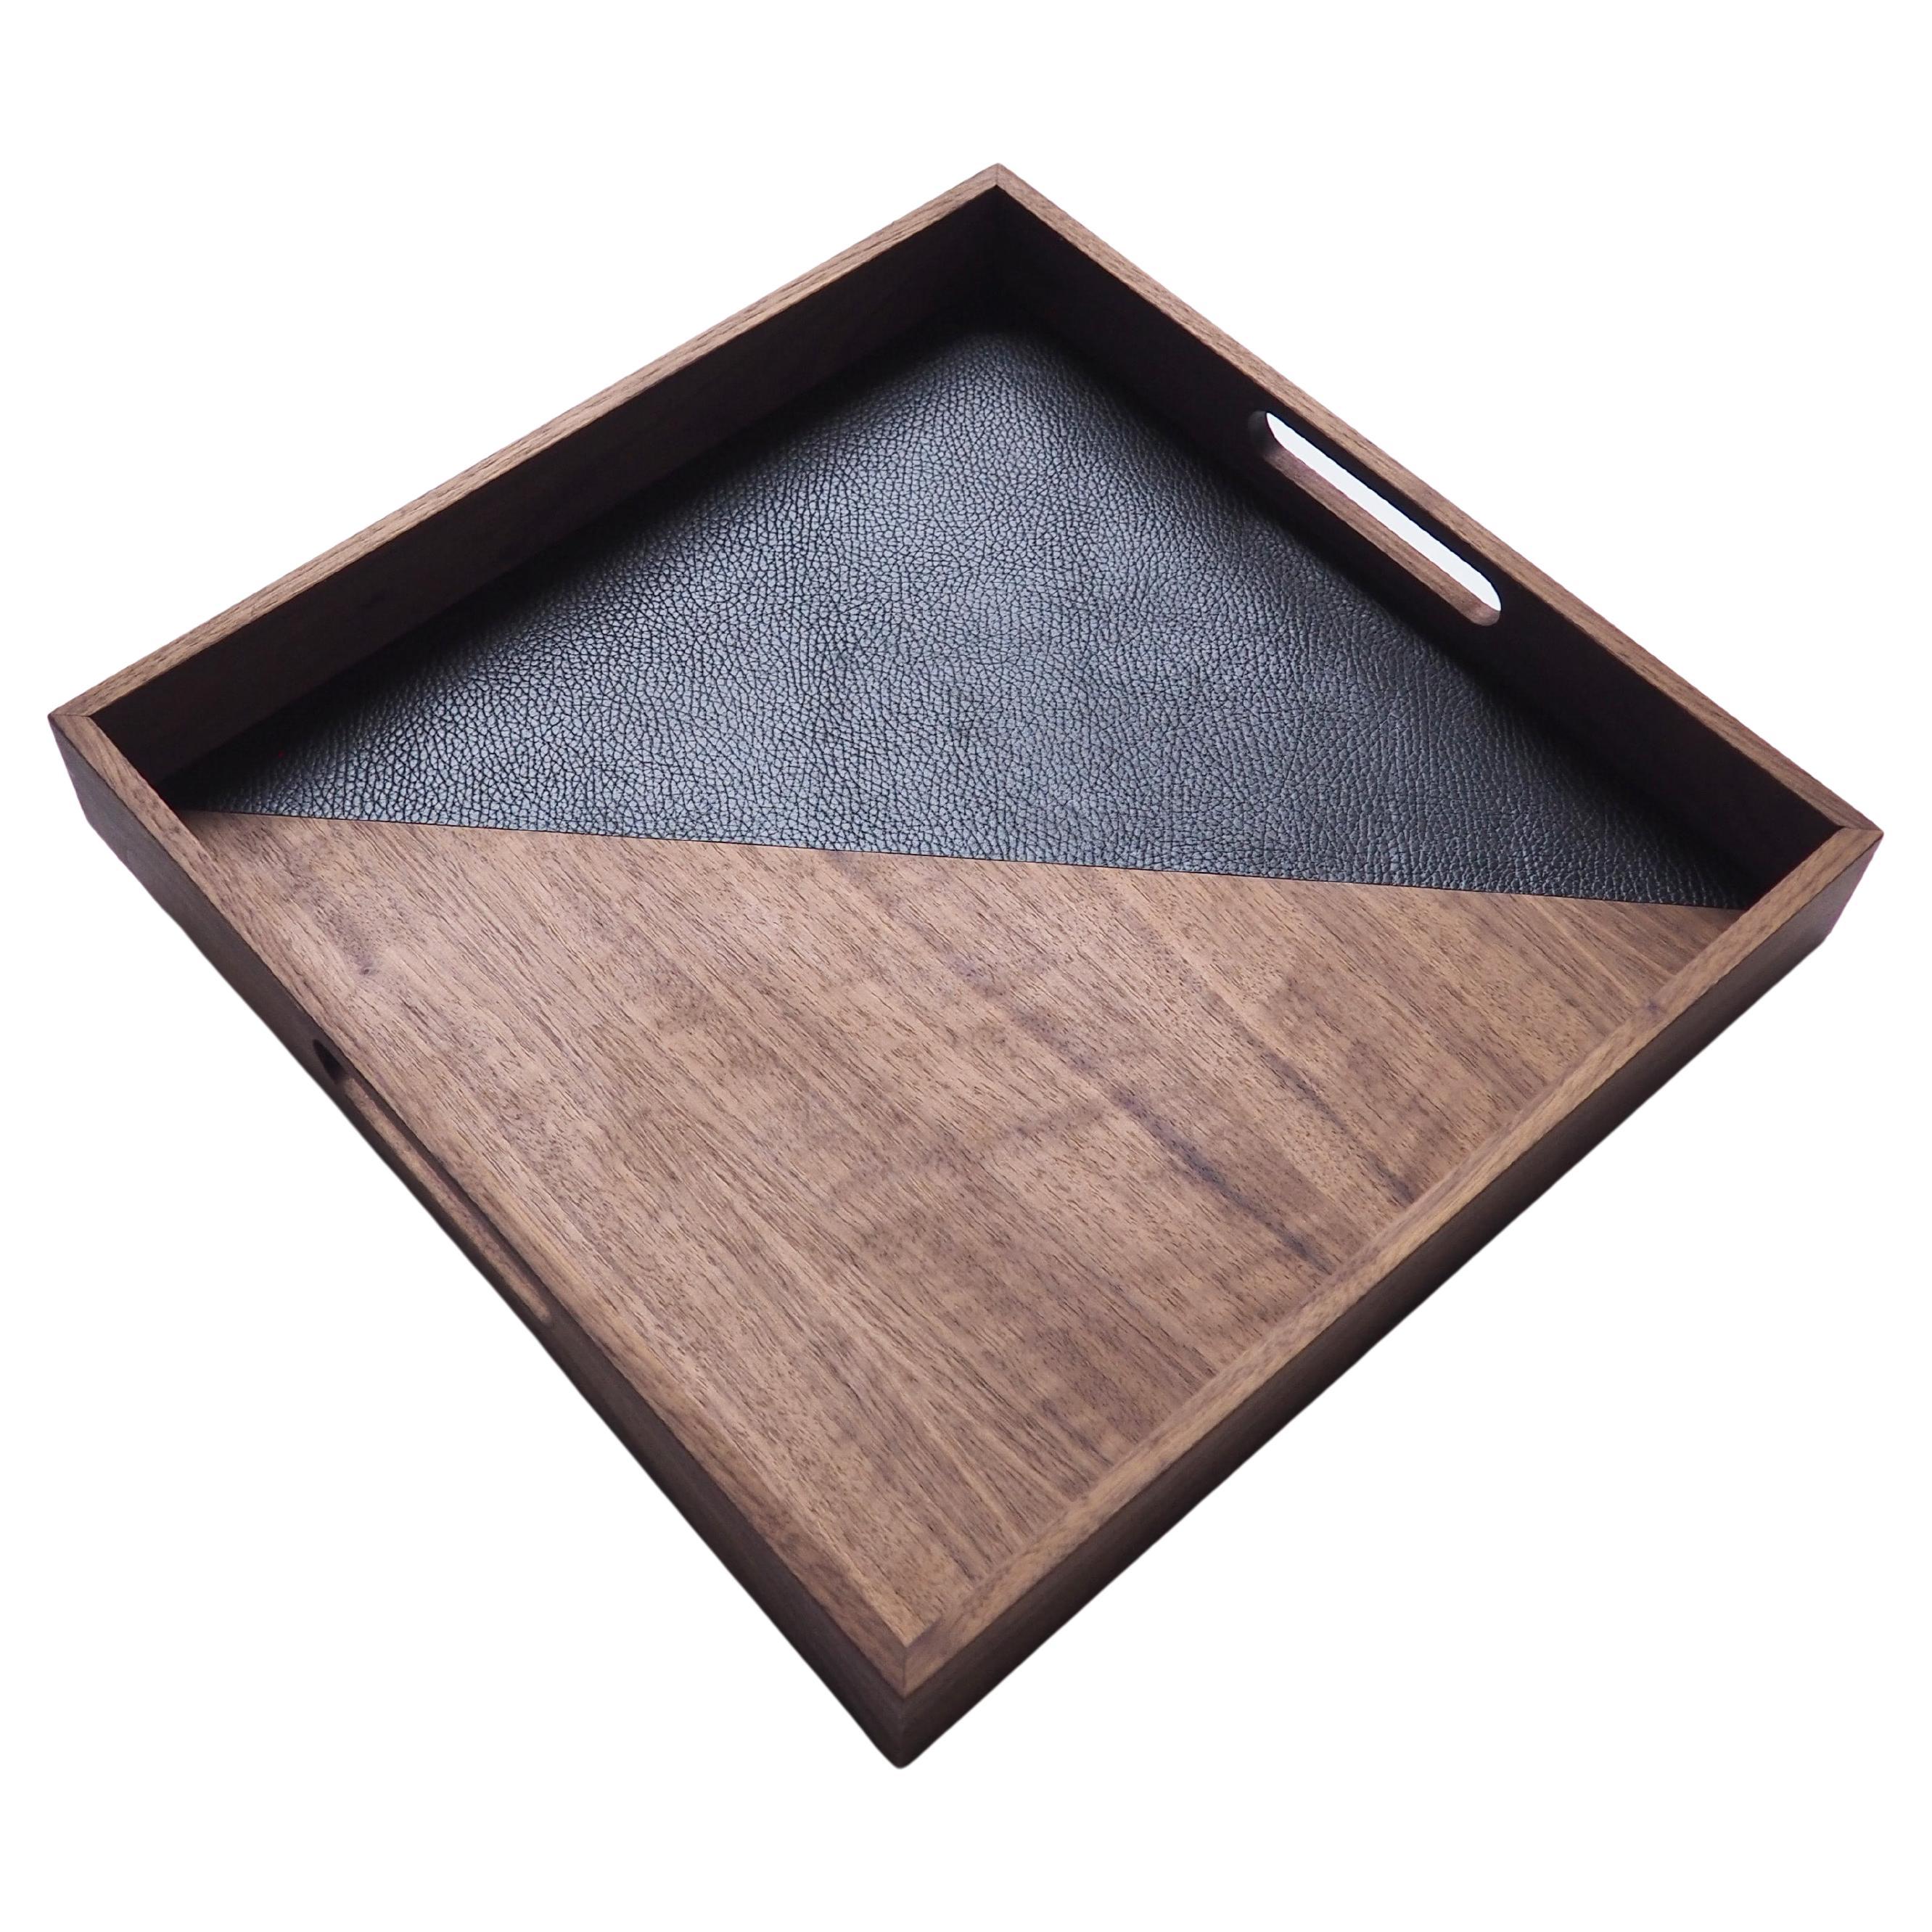 "After Hours" Square tray in walnut and black leather by Atelier C.u.b